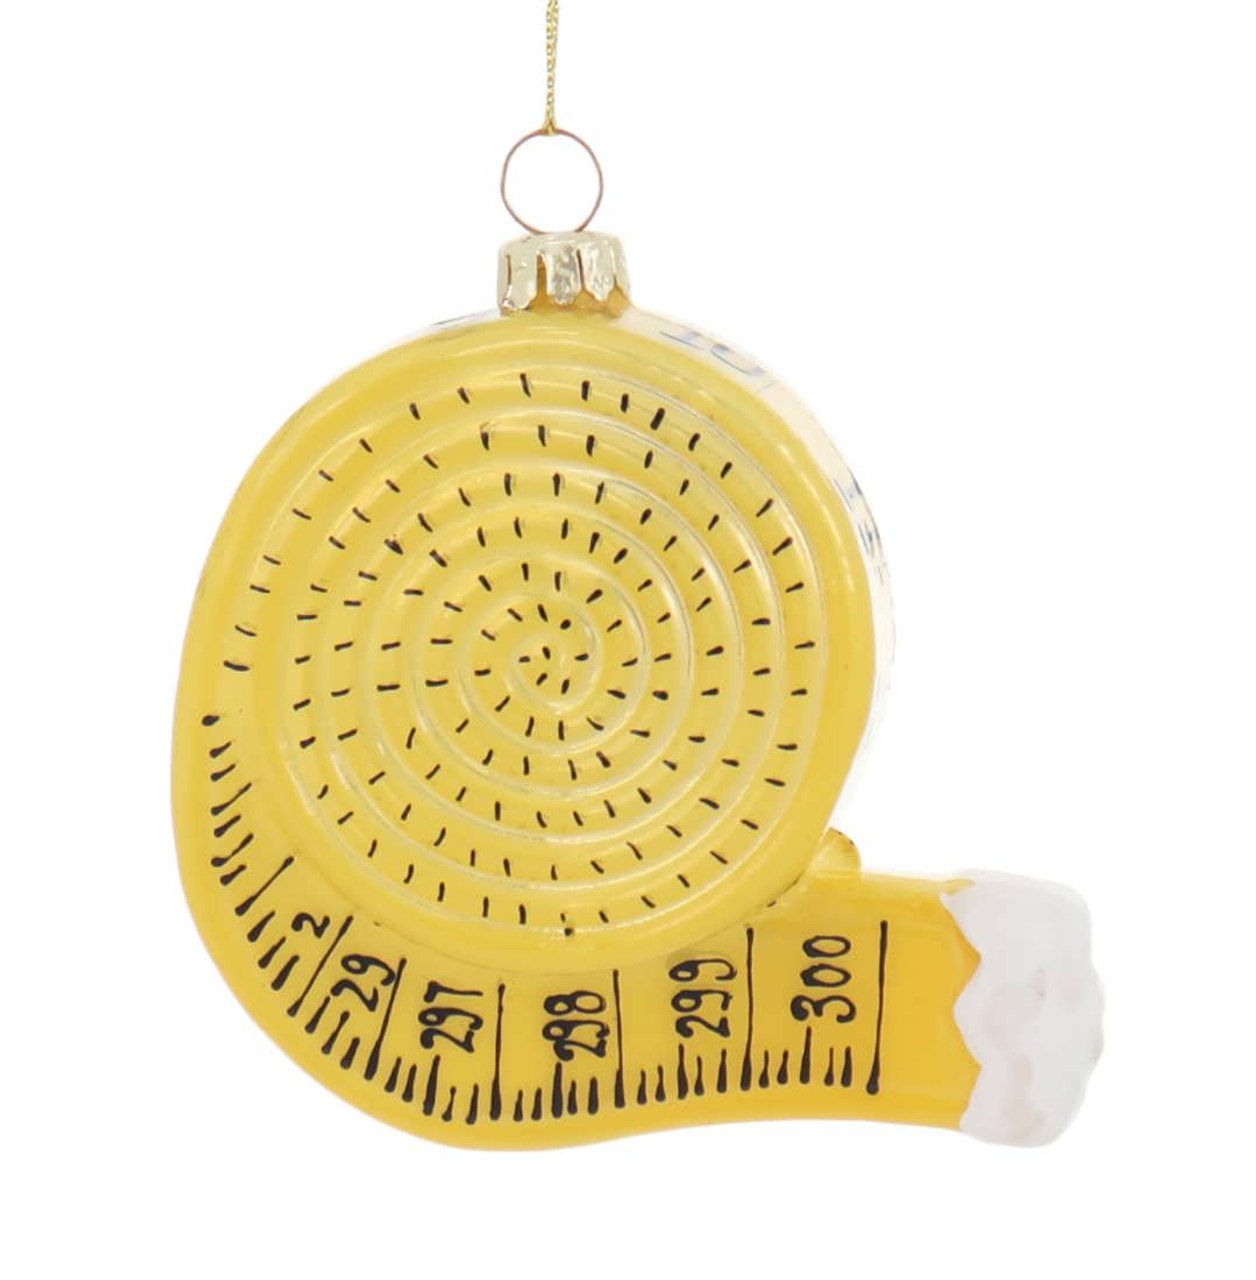 Sewing Measuring Tape Glass Ornament 3 1/4 by Cody Foster